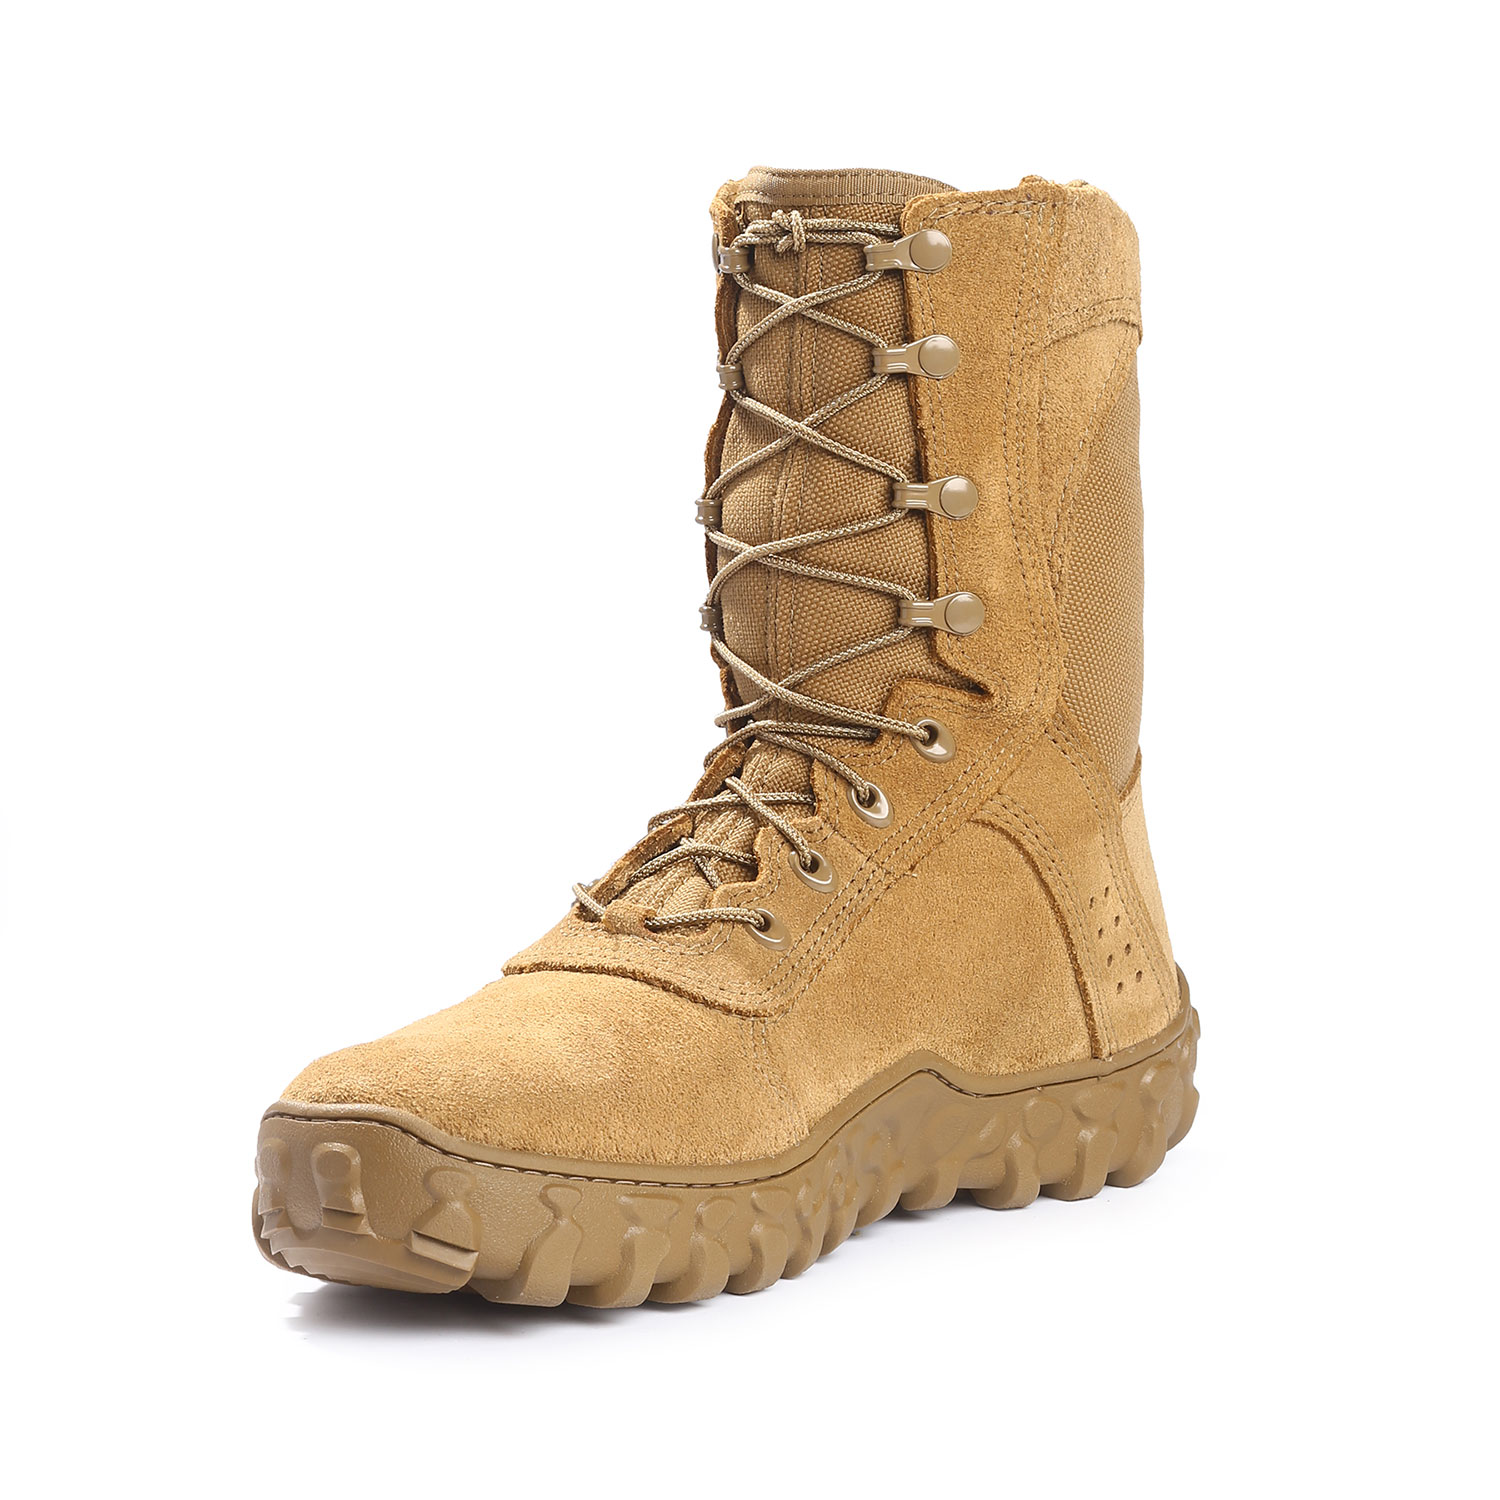 Rocky S2V Tactical Military Boot